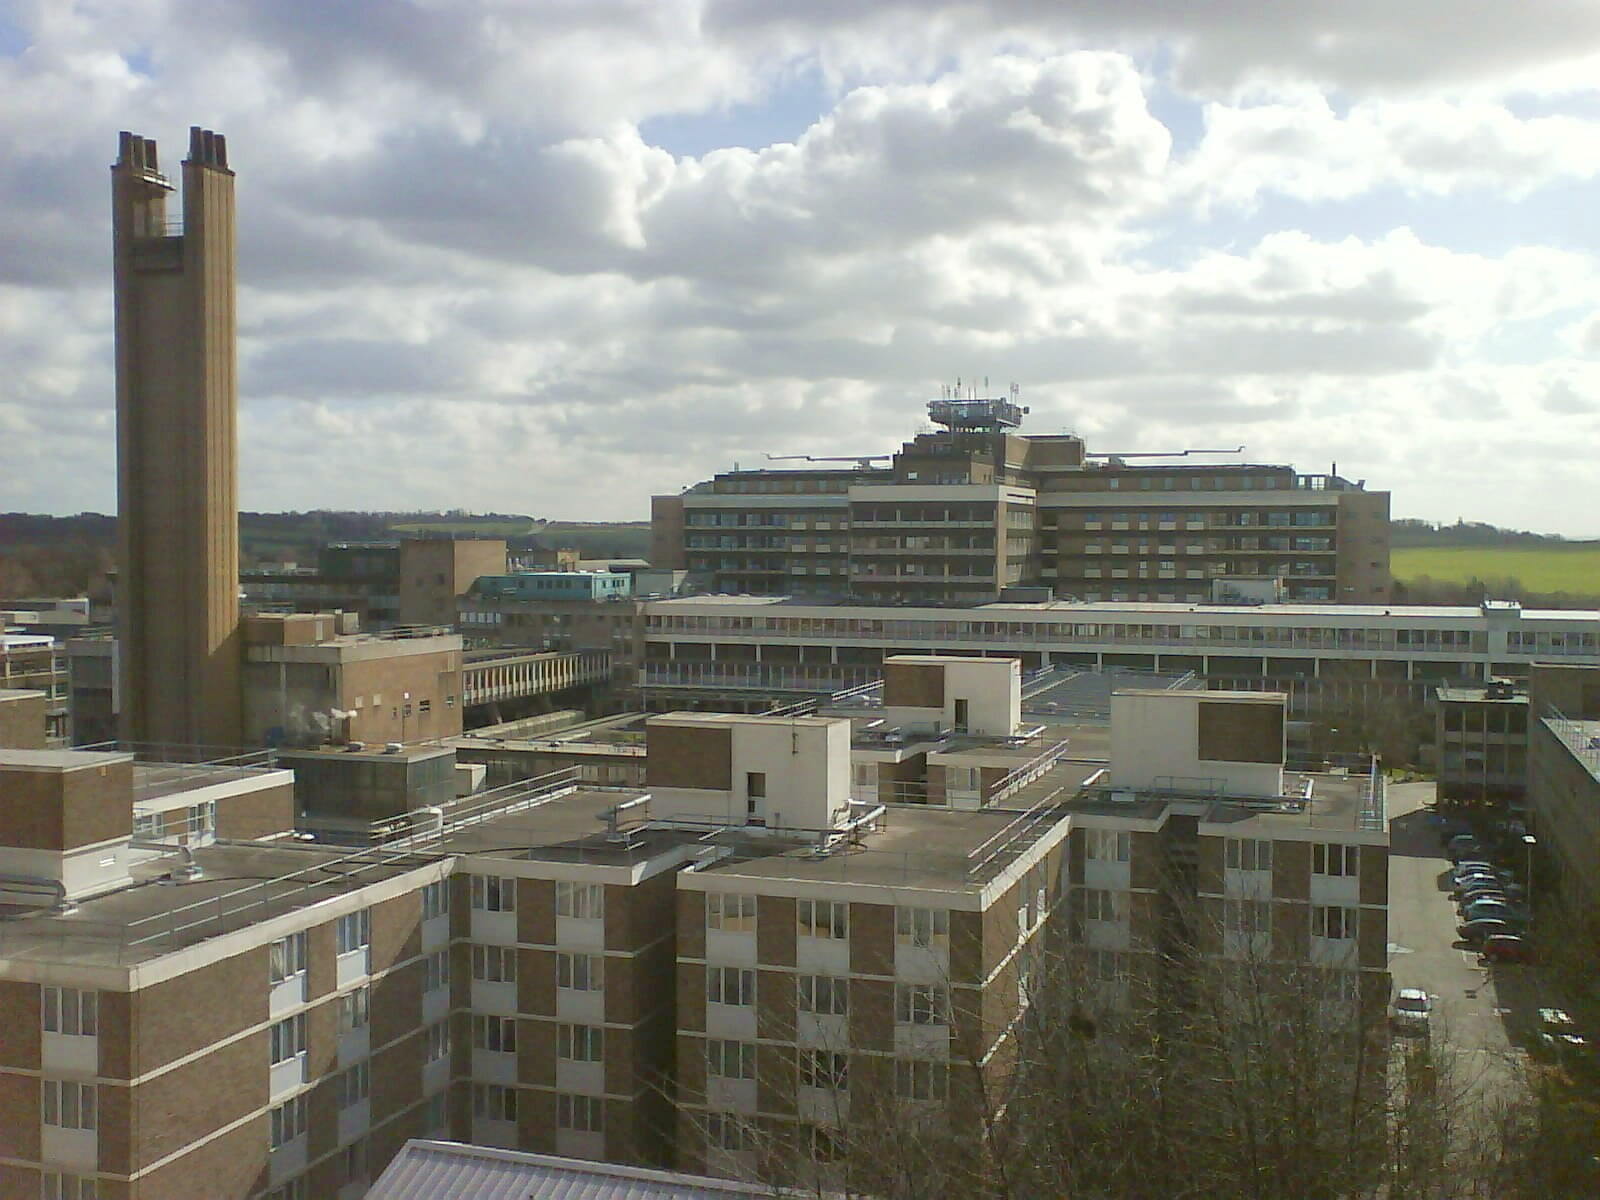 Cambridge - Taken by the user, from the top of the multistory car park at en:Addenbrooke's Hospital.